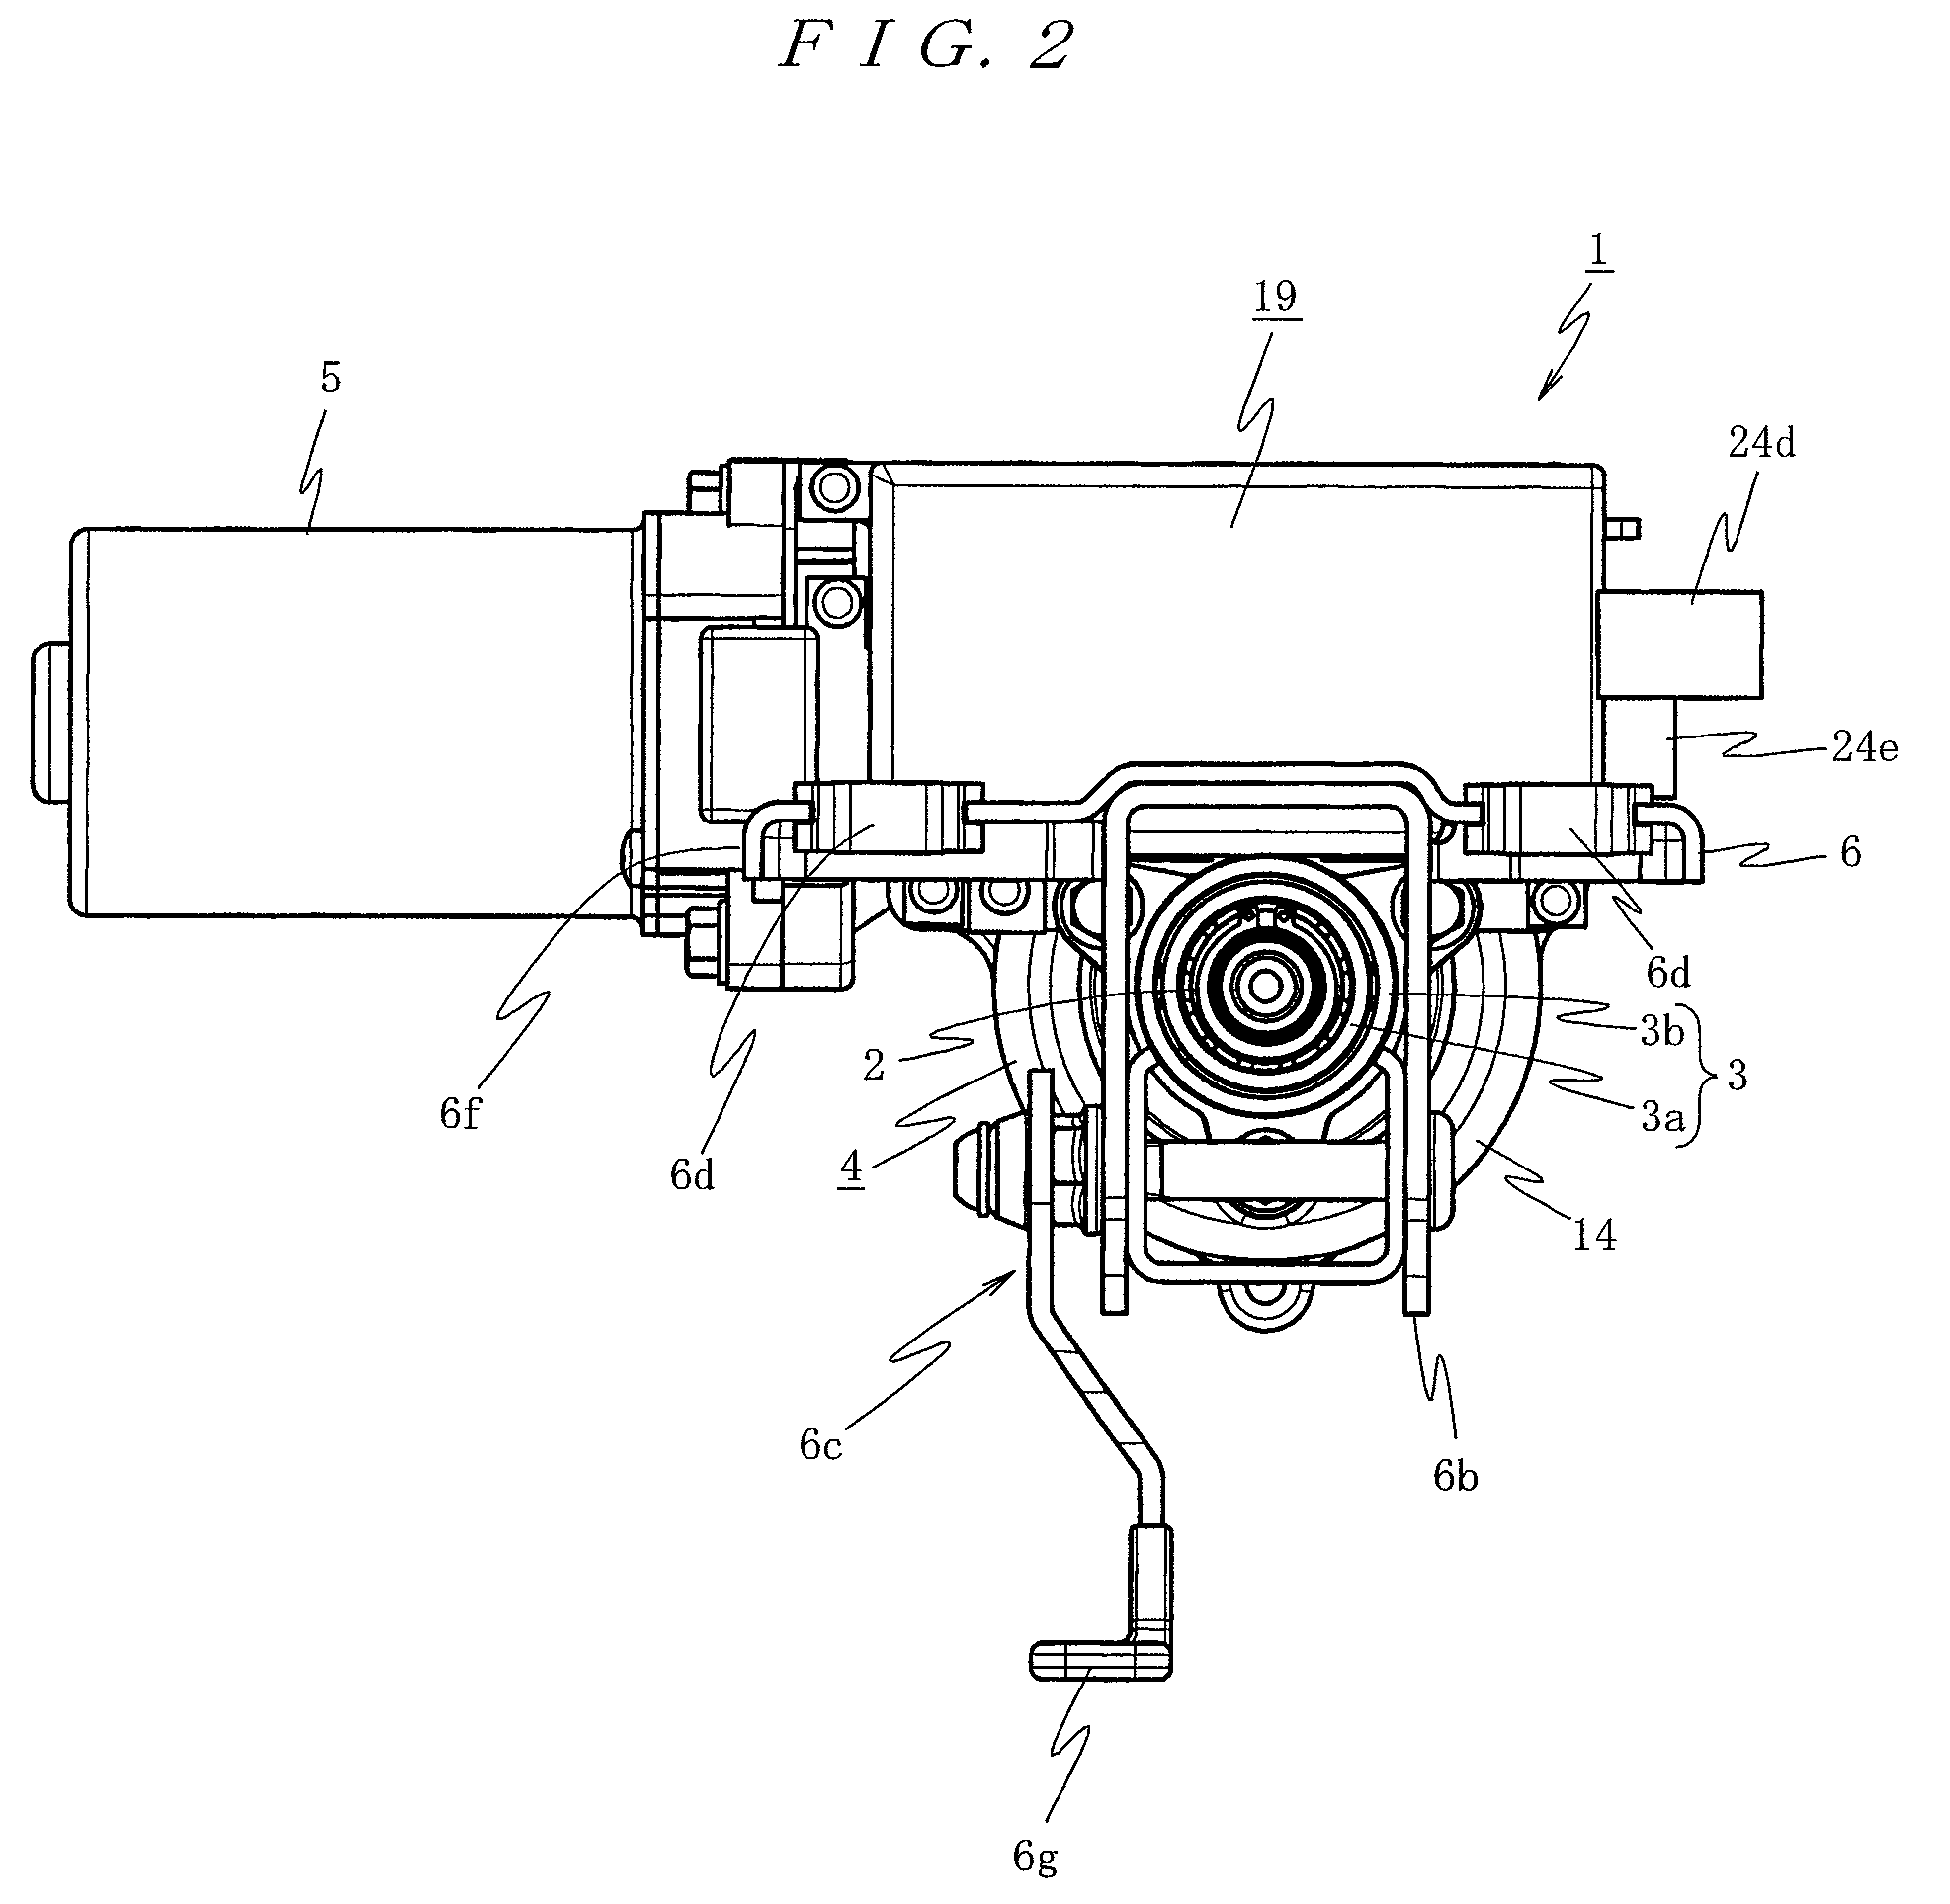 Electric power steering apparatus and method of assembling the same